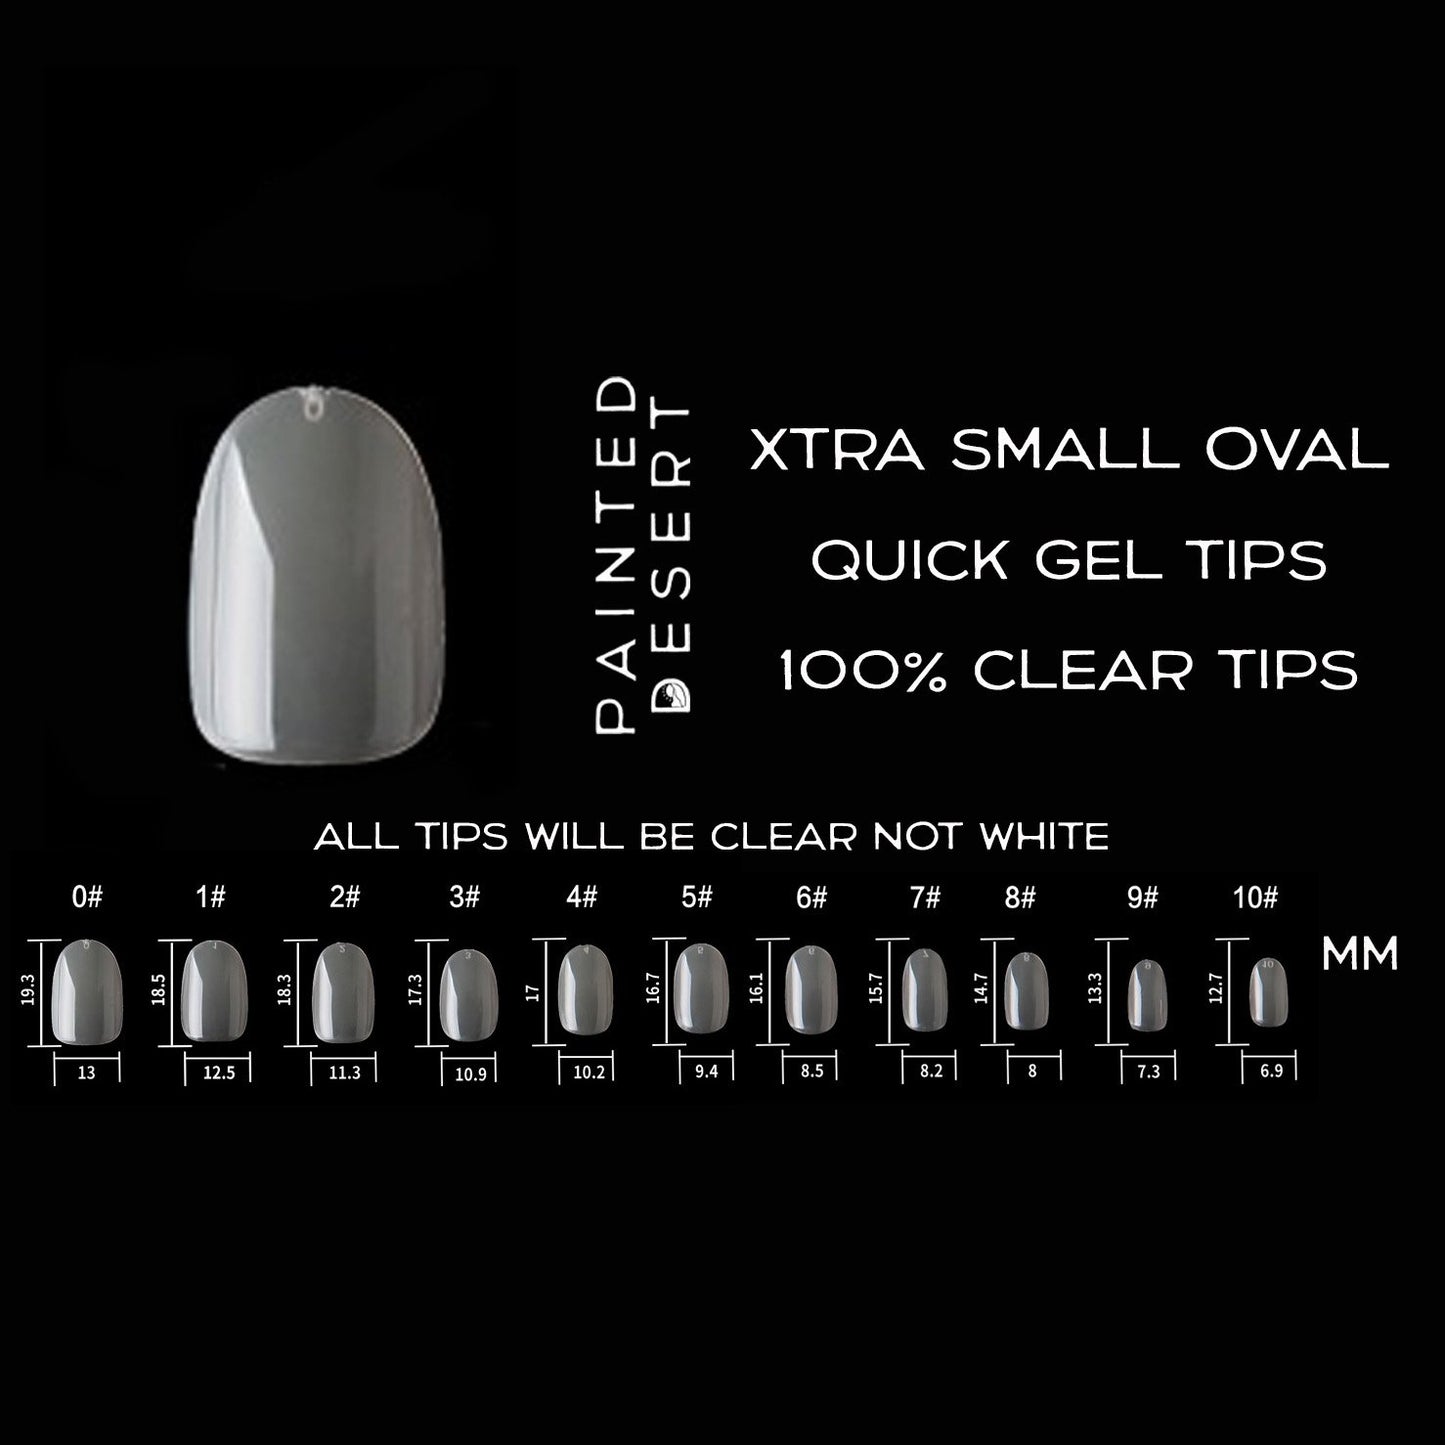 Xtra Small Oval Quick Gel Tips